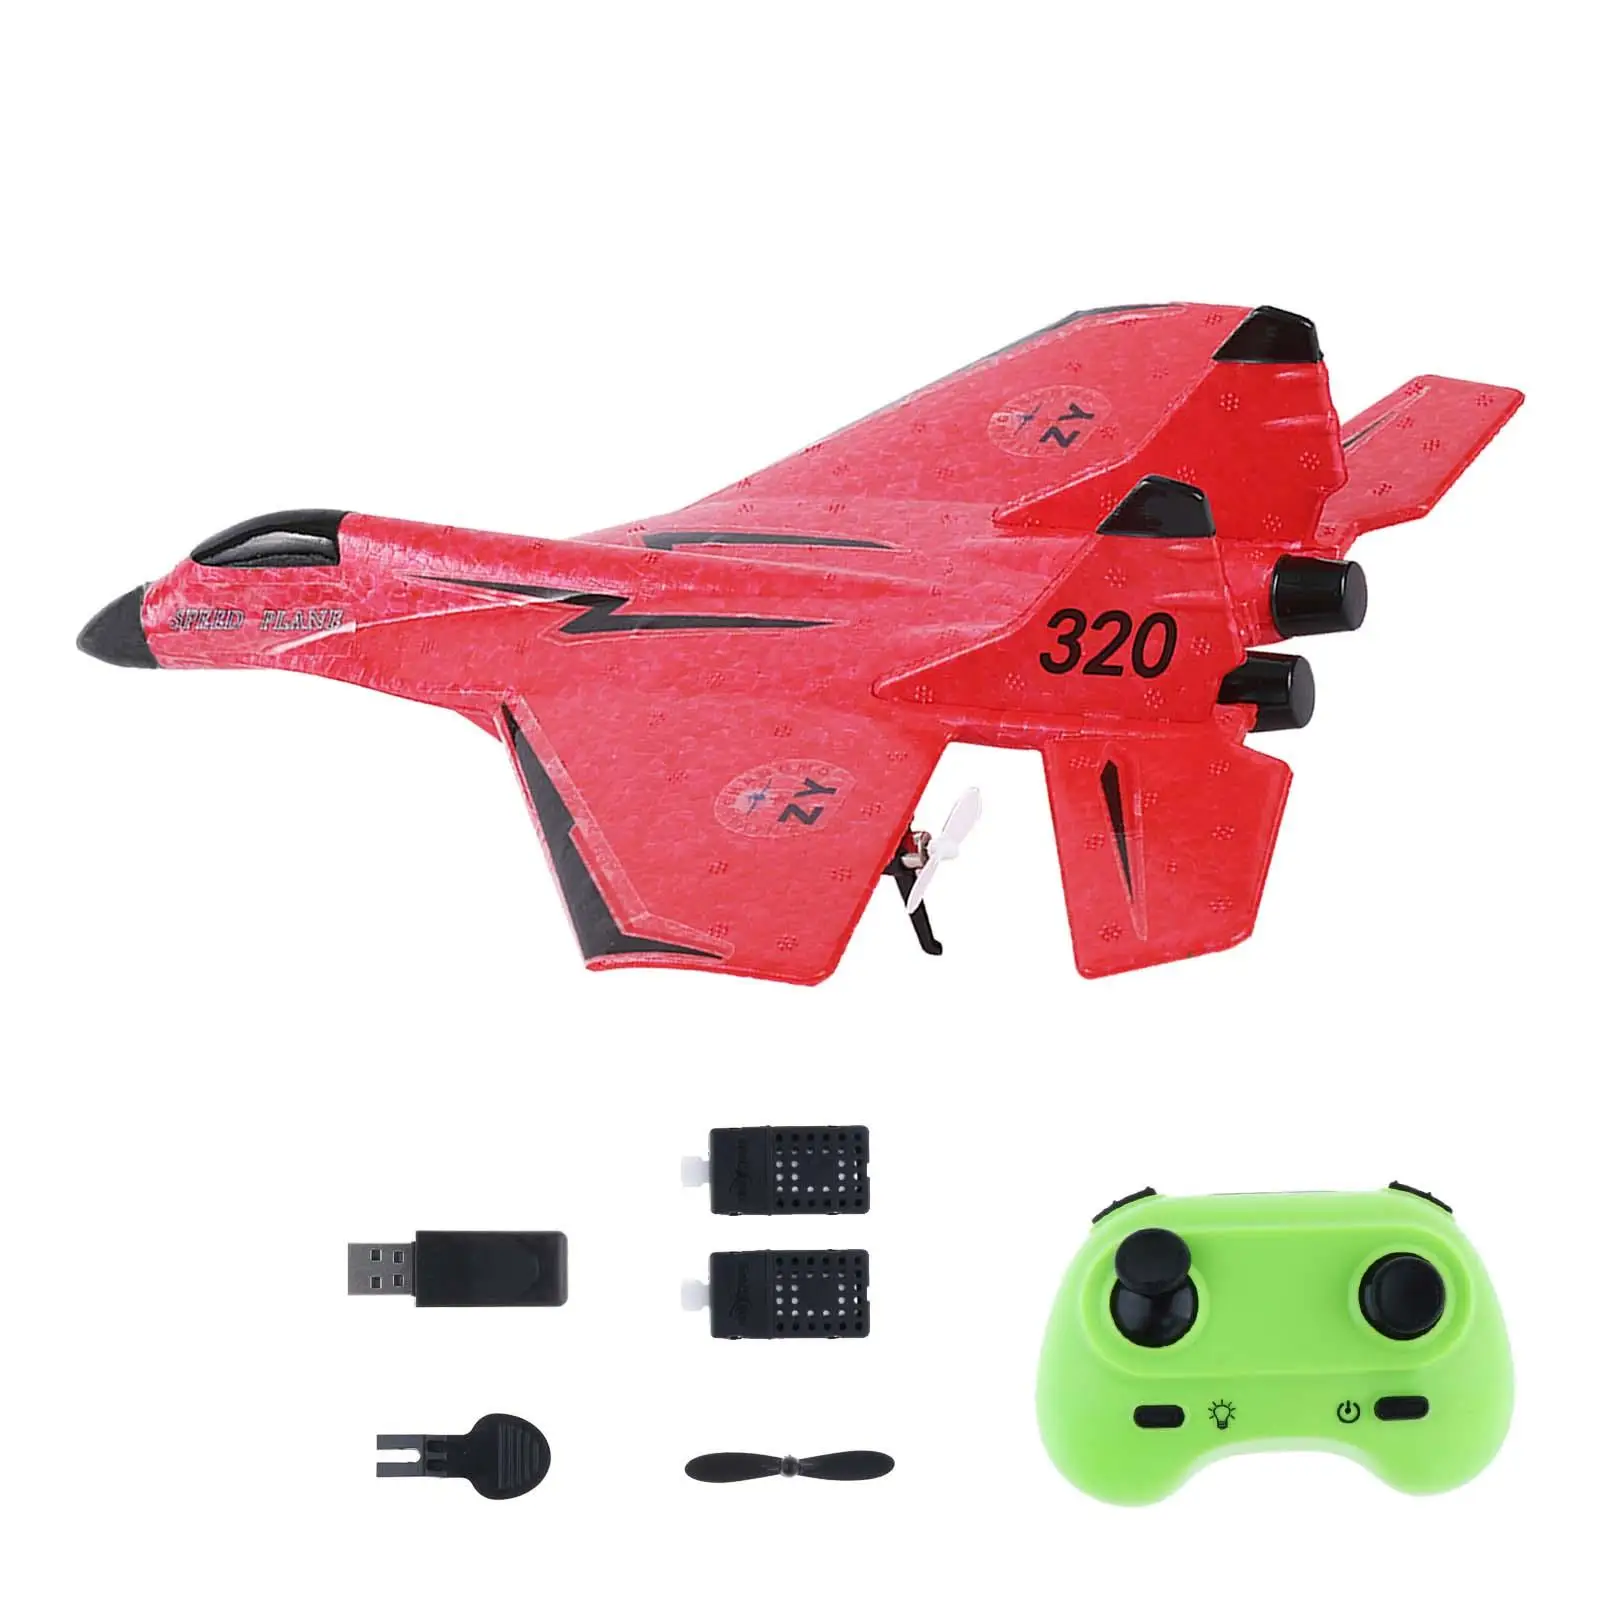 2CH RC Plane Outdoor Toys Ready to Flying Easy to Control Foam RC Glider Aircraft Model for Beginner Adults Kids Boys Girls